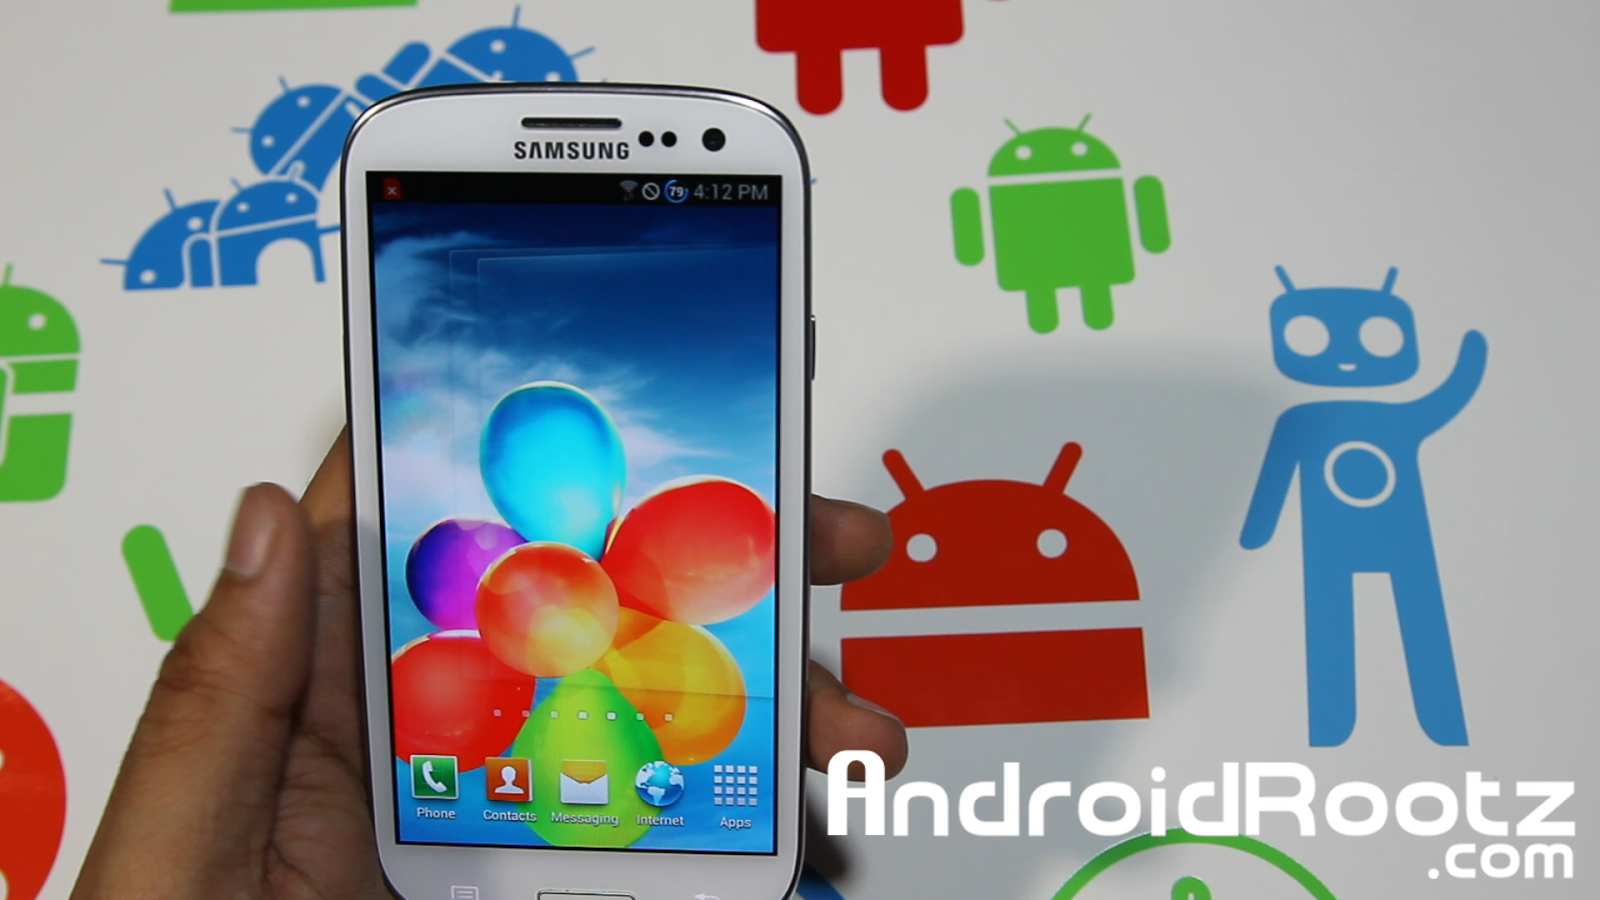 Galaxy S4 S Voice HD Wallpaper Ringtones Leaked Androidrootz